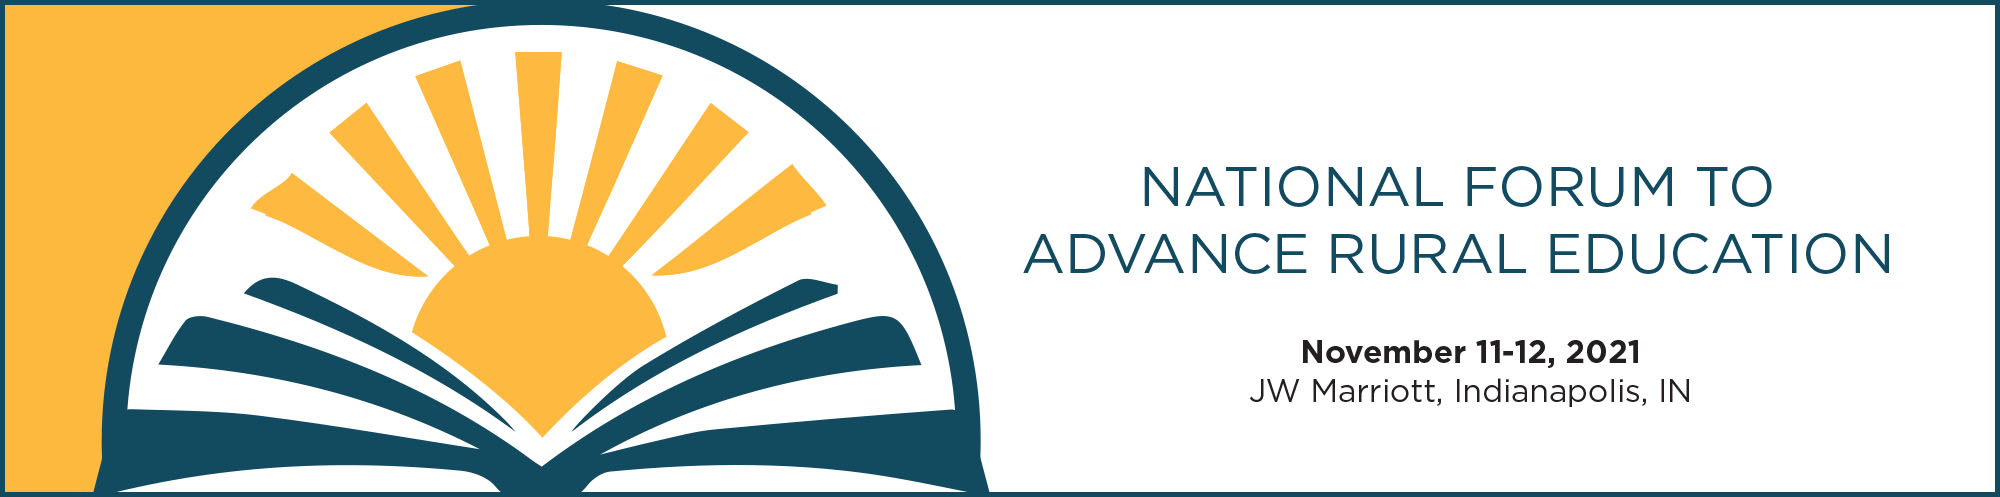 National Forum to Advance Rural Education - November 11-12, 2021 at JW Marriott, Indianapolis, IN